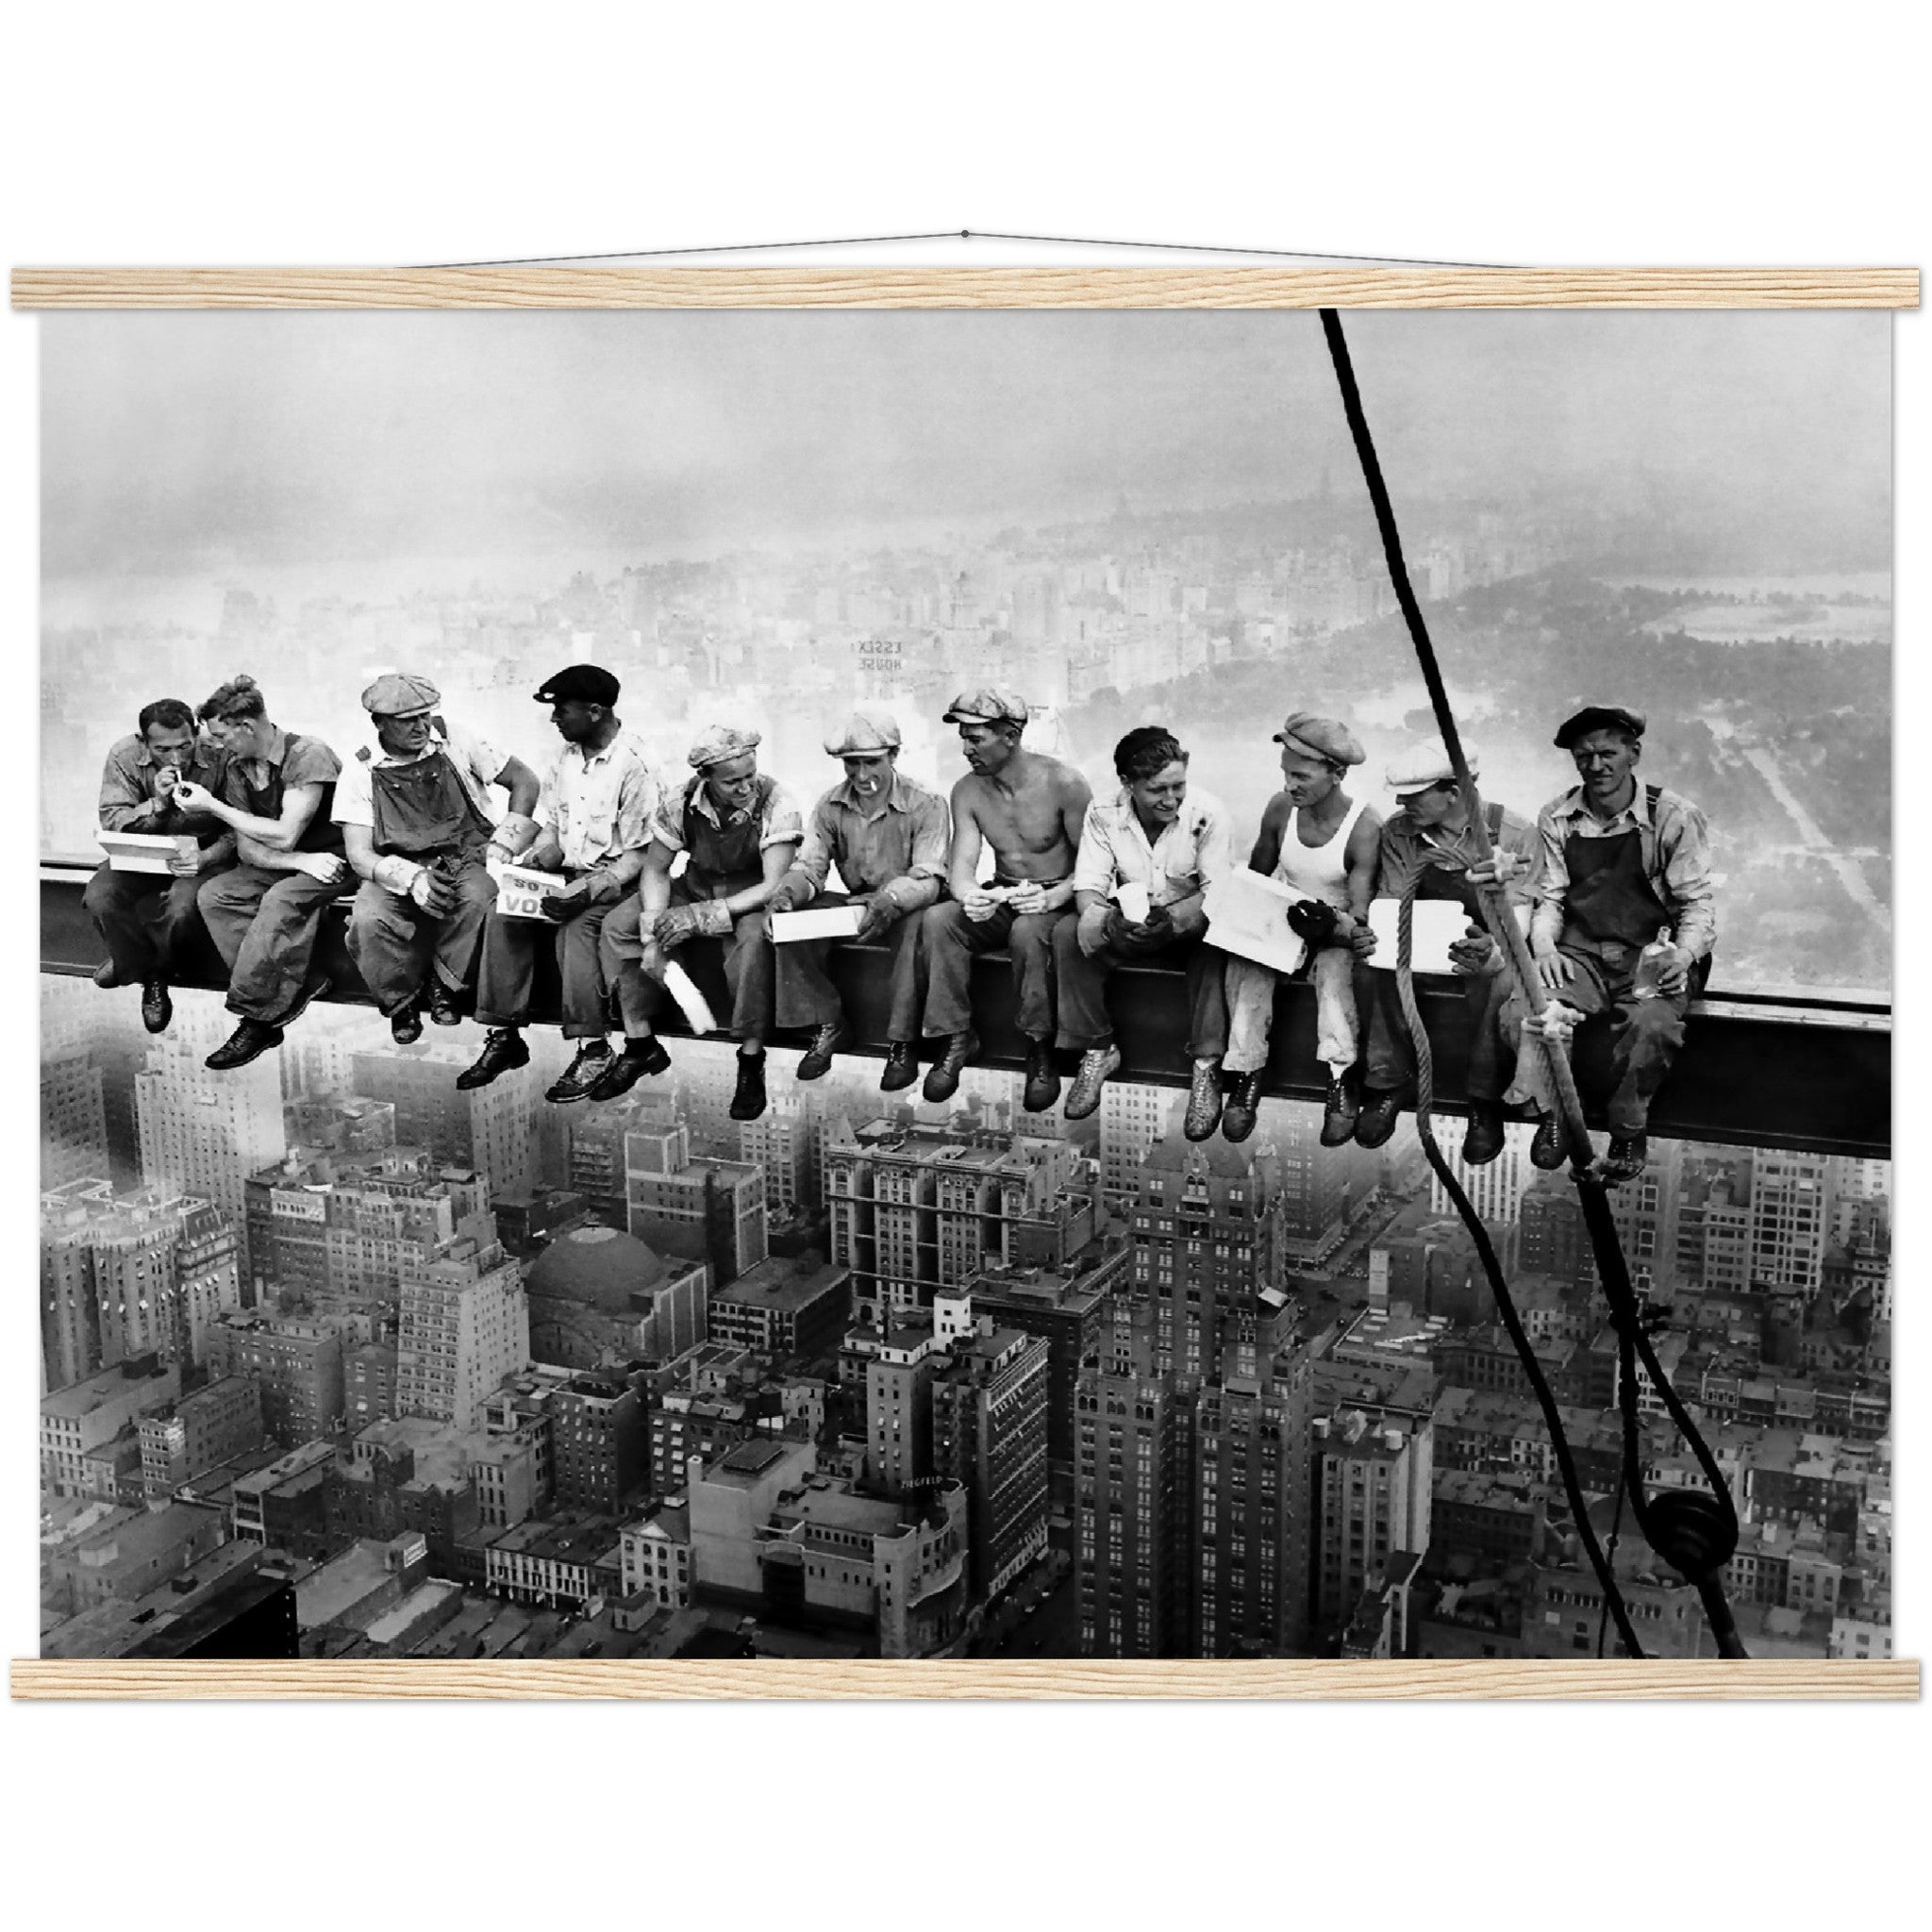 Lunch Atop A Skyscraper Poster, Lunch On A Beam, Vintage Photo 1932 Construction Workers - WallArtPrints4U